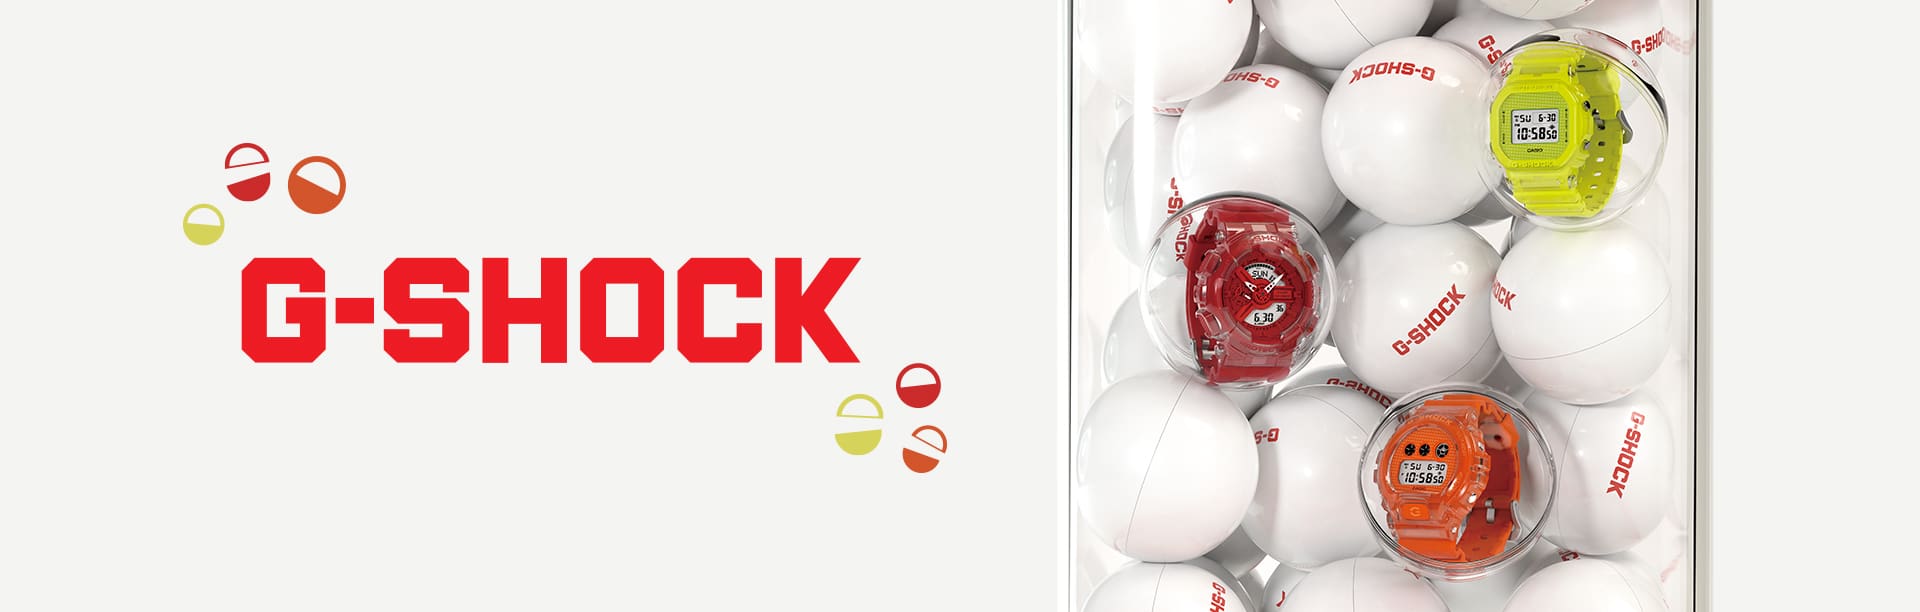 Red G-SHOCK logo and half circle lucky drop shells with watches inside